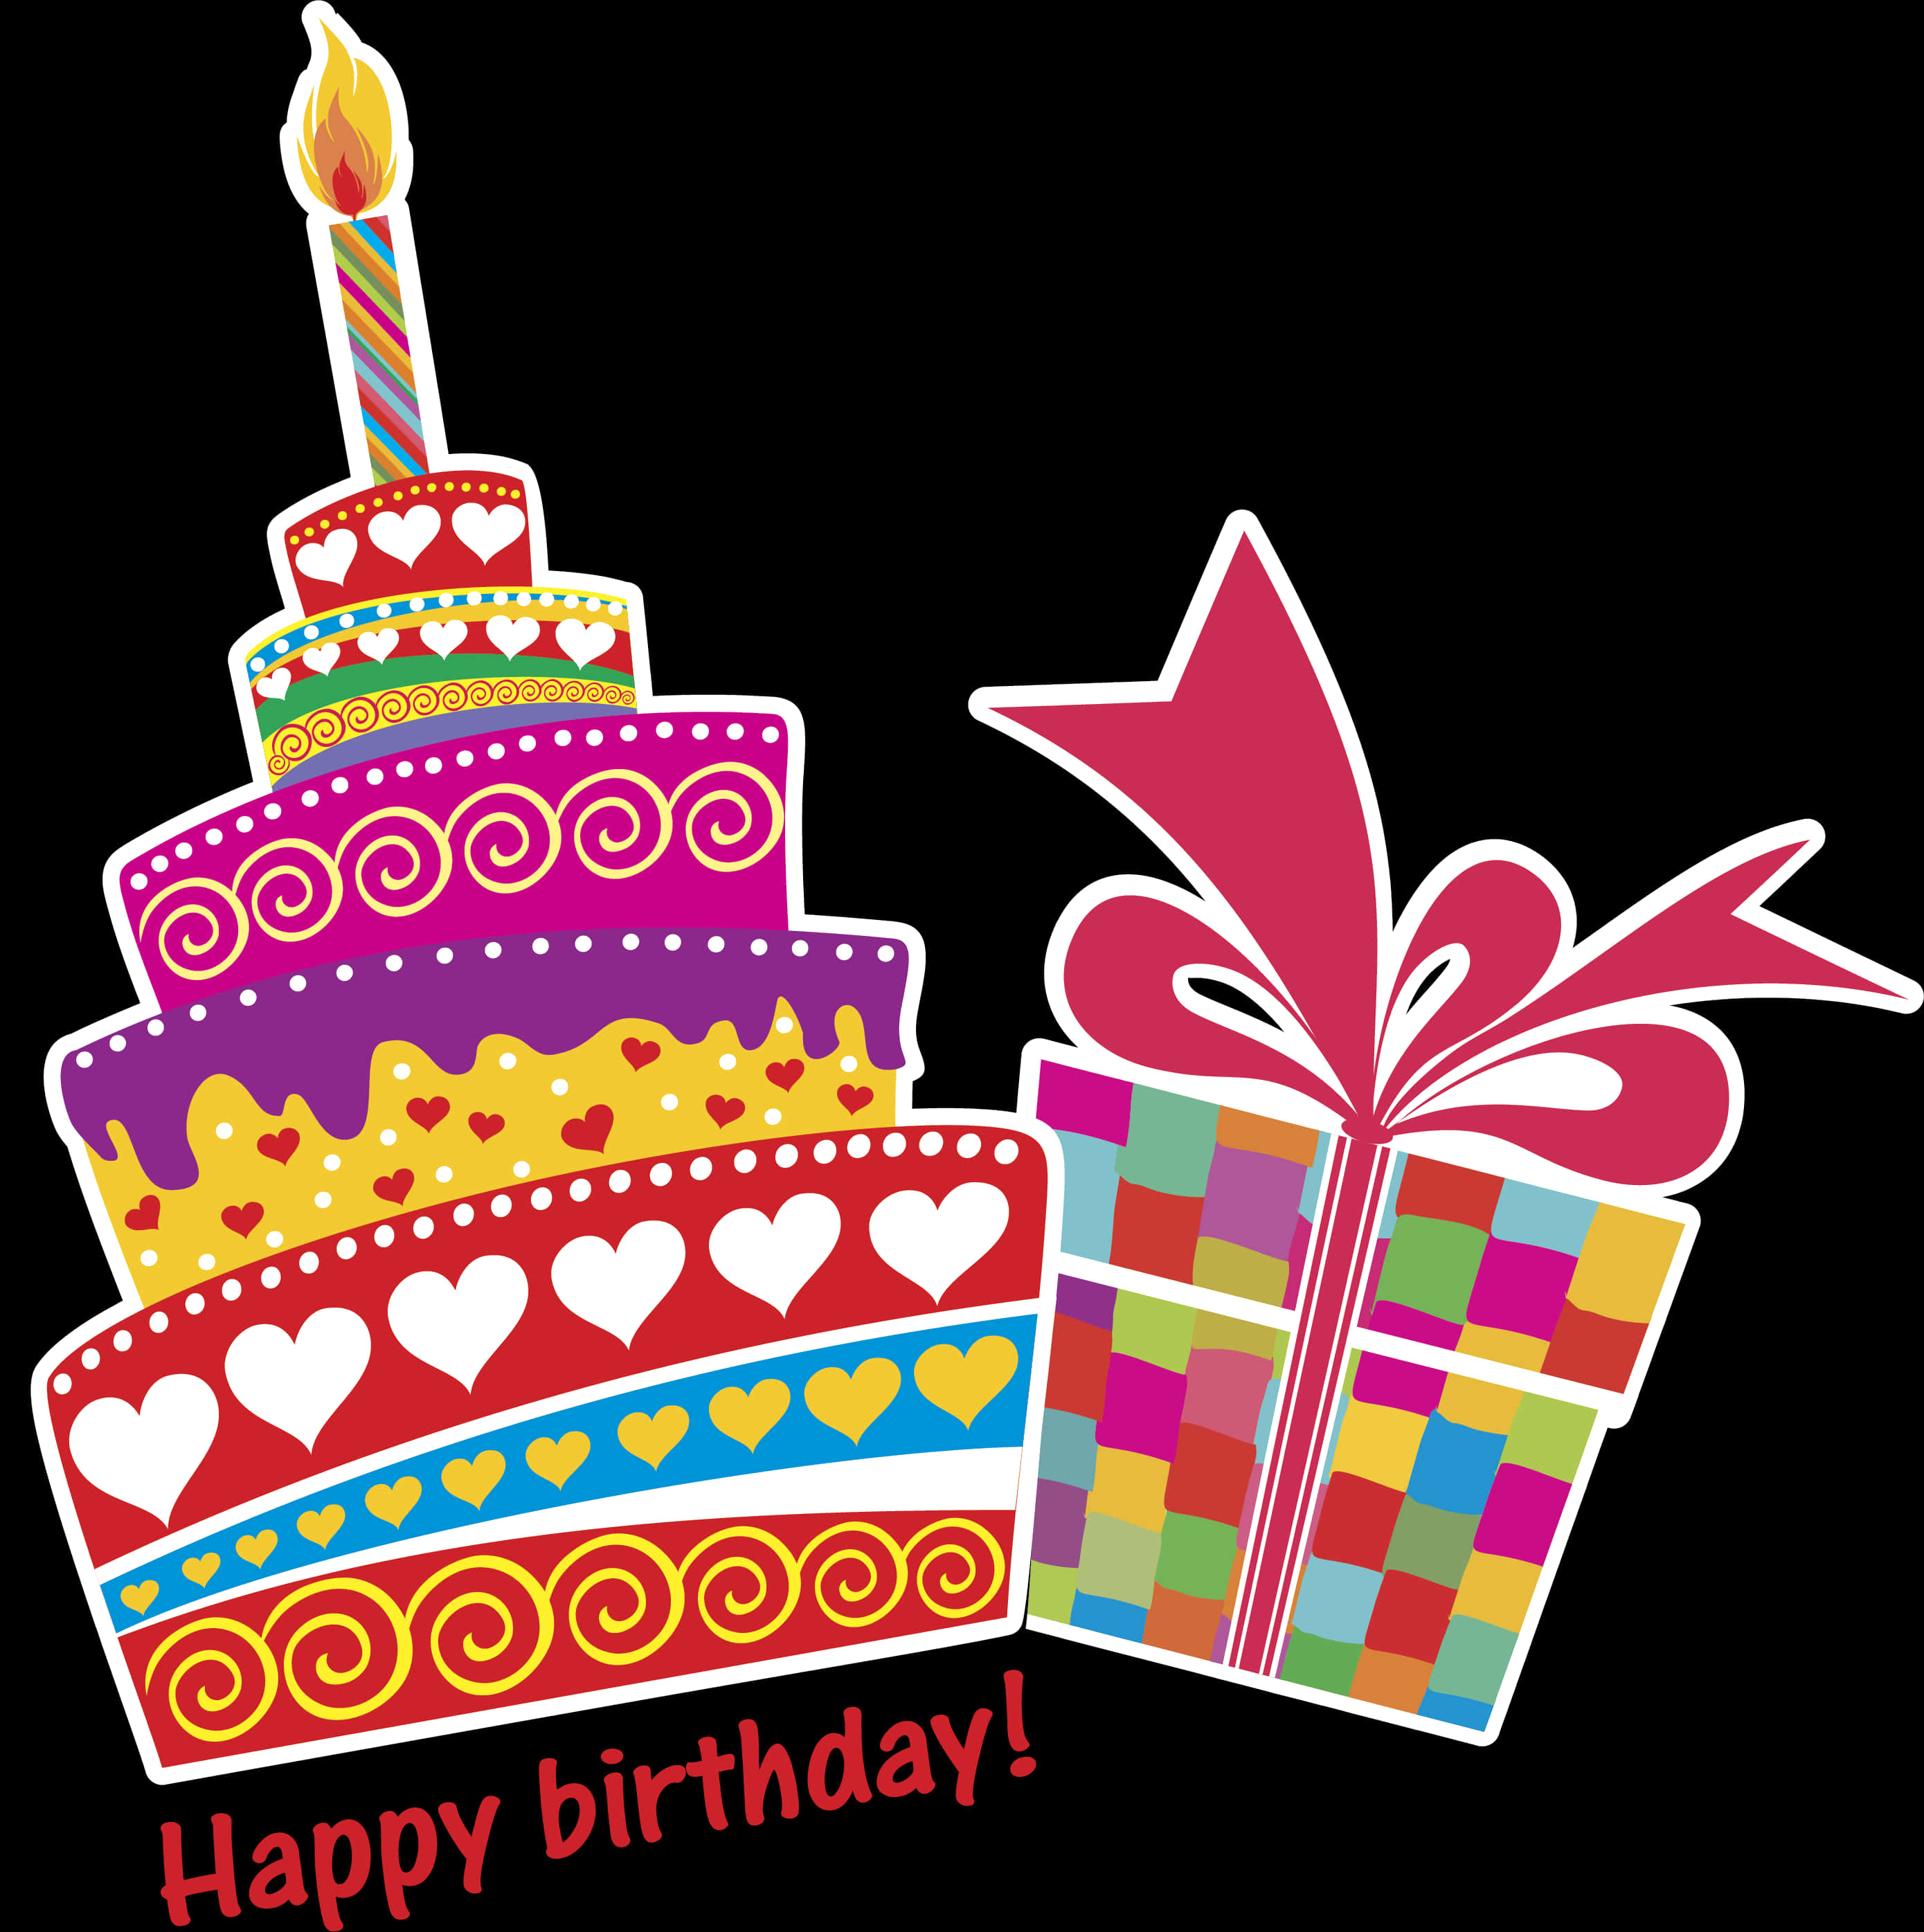 Colorful Birthday Cakeand Gift Illustration PNG image